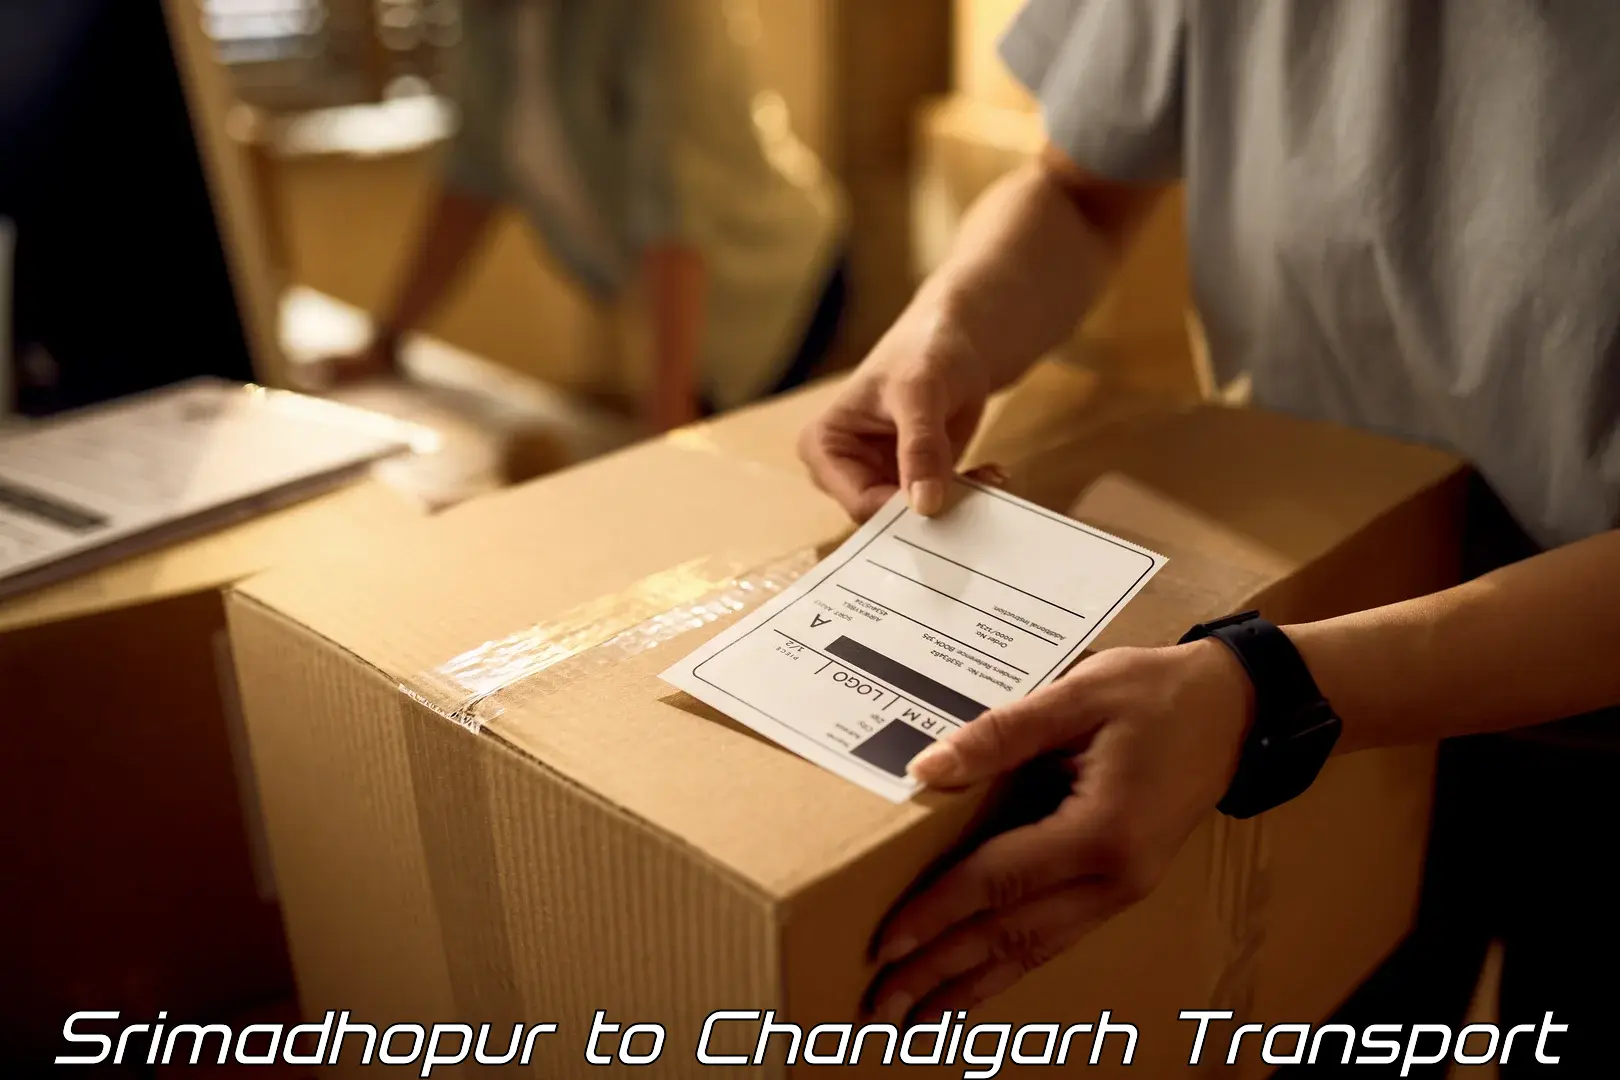 Container transportation services Srimadhopur to Chandigarh